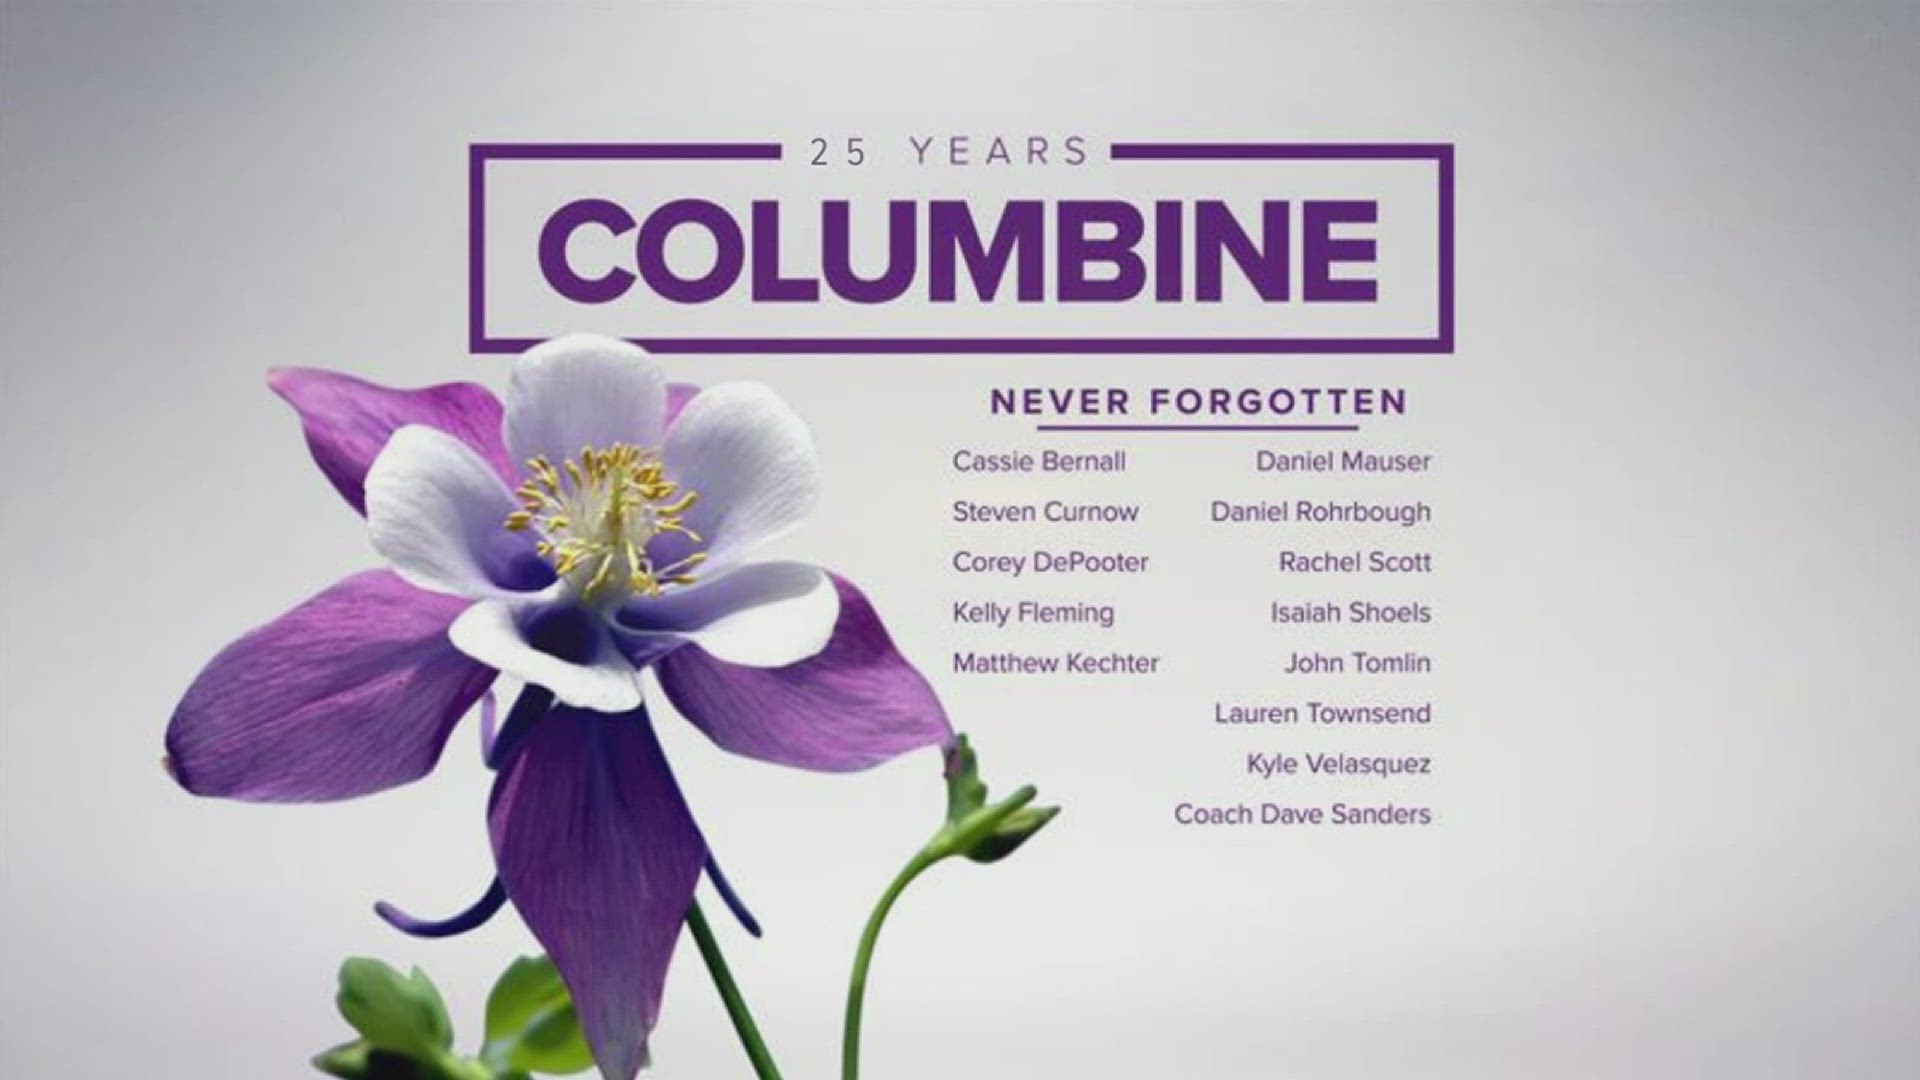 25 years after Columbine High School shooting the 12 students and teacher who were killed remembered at a Denver vigil held on Friday, April 19.